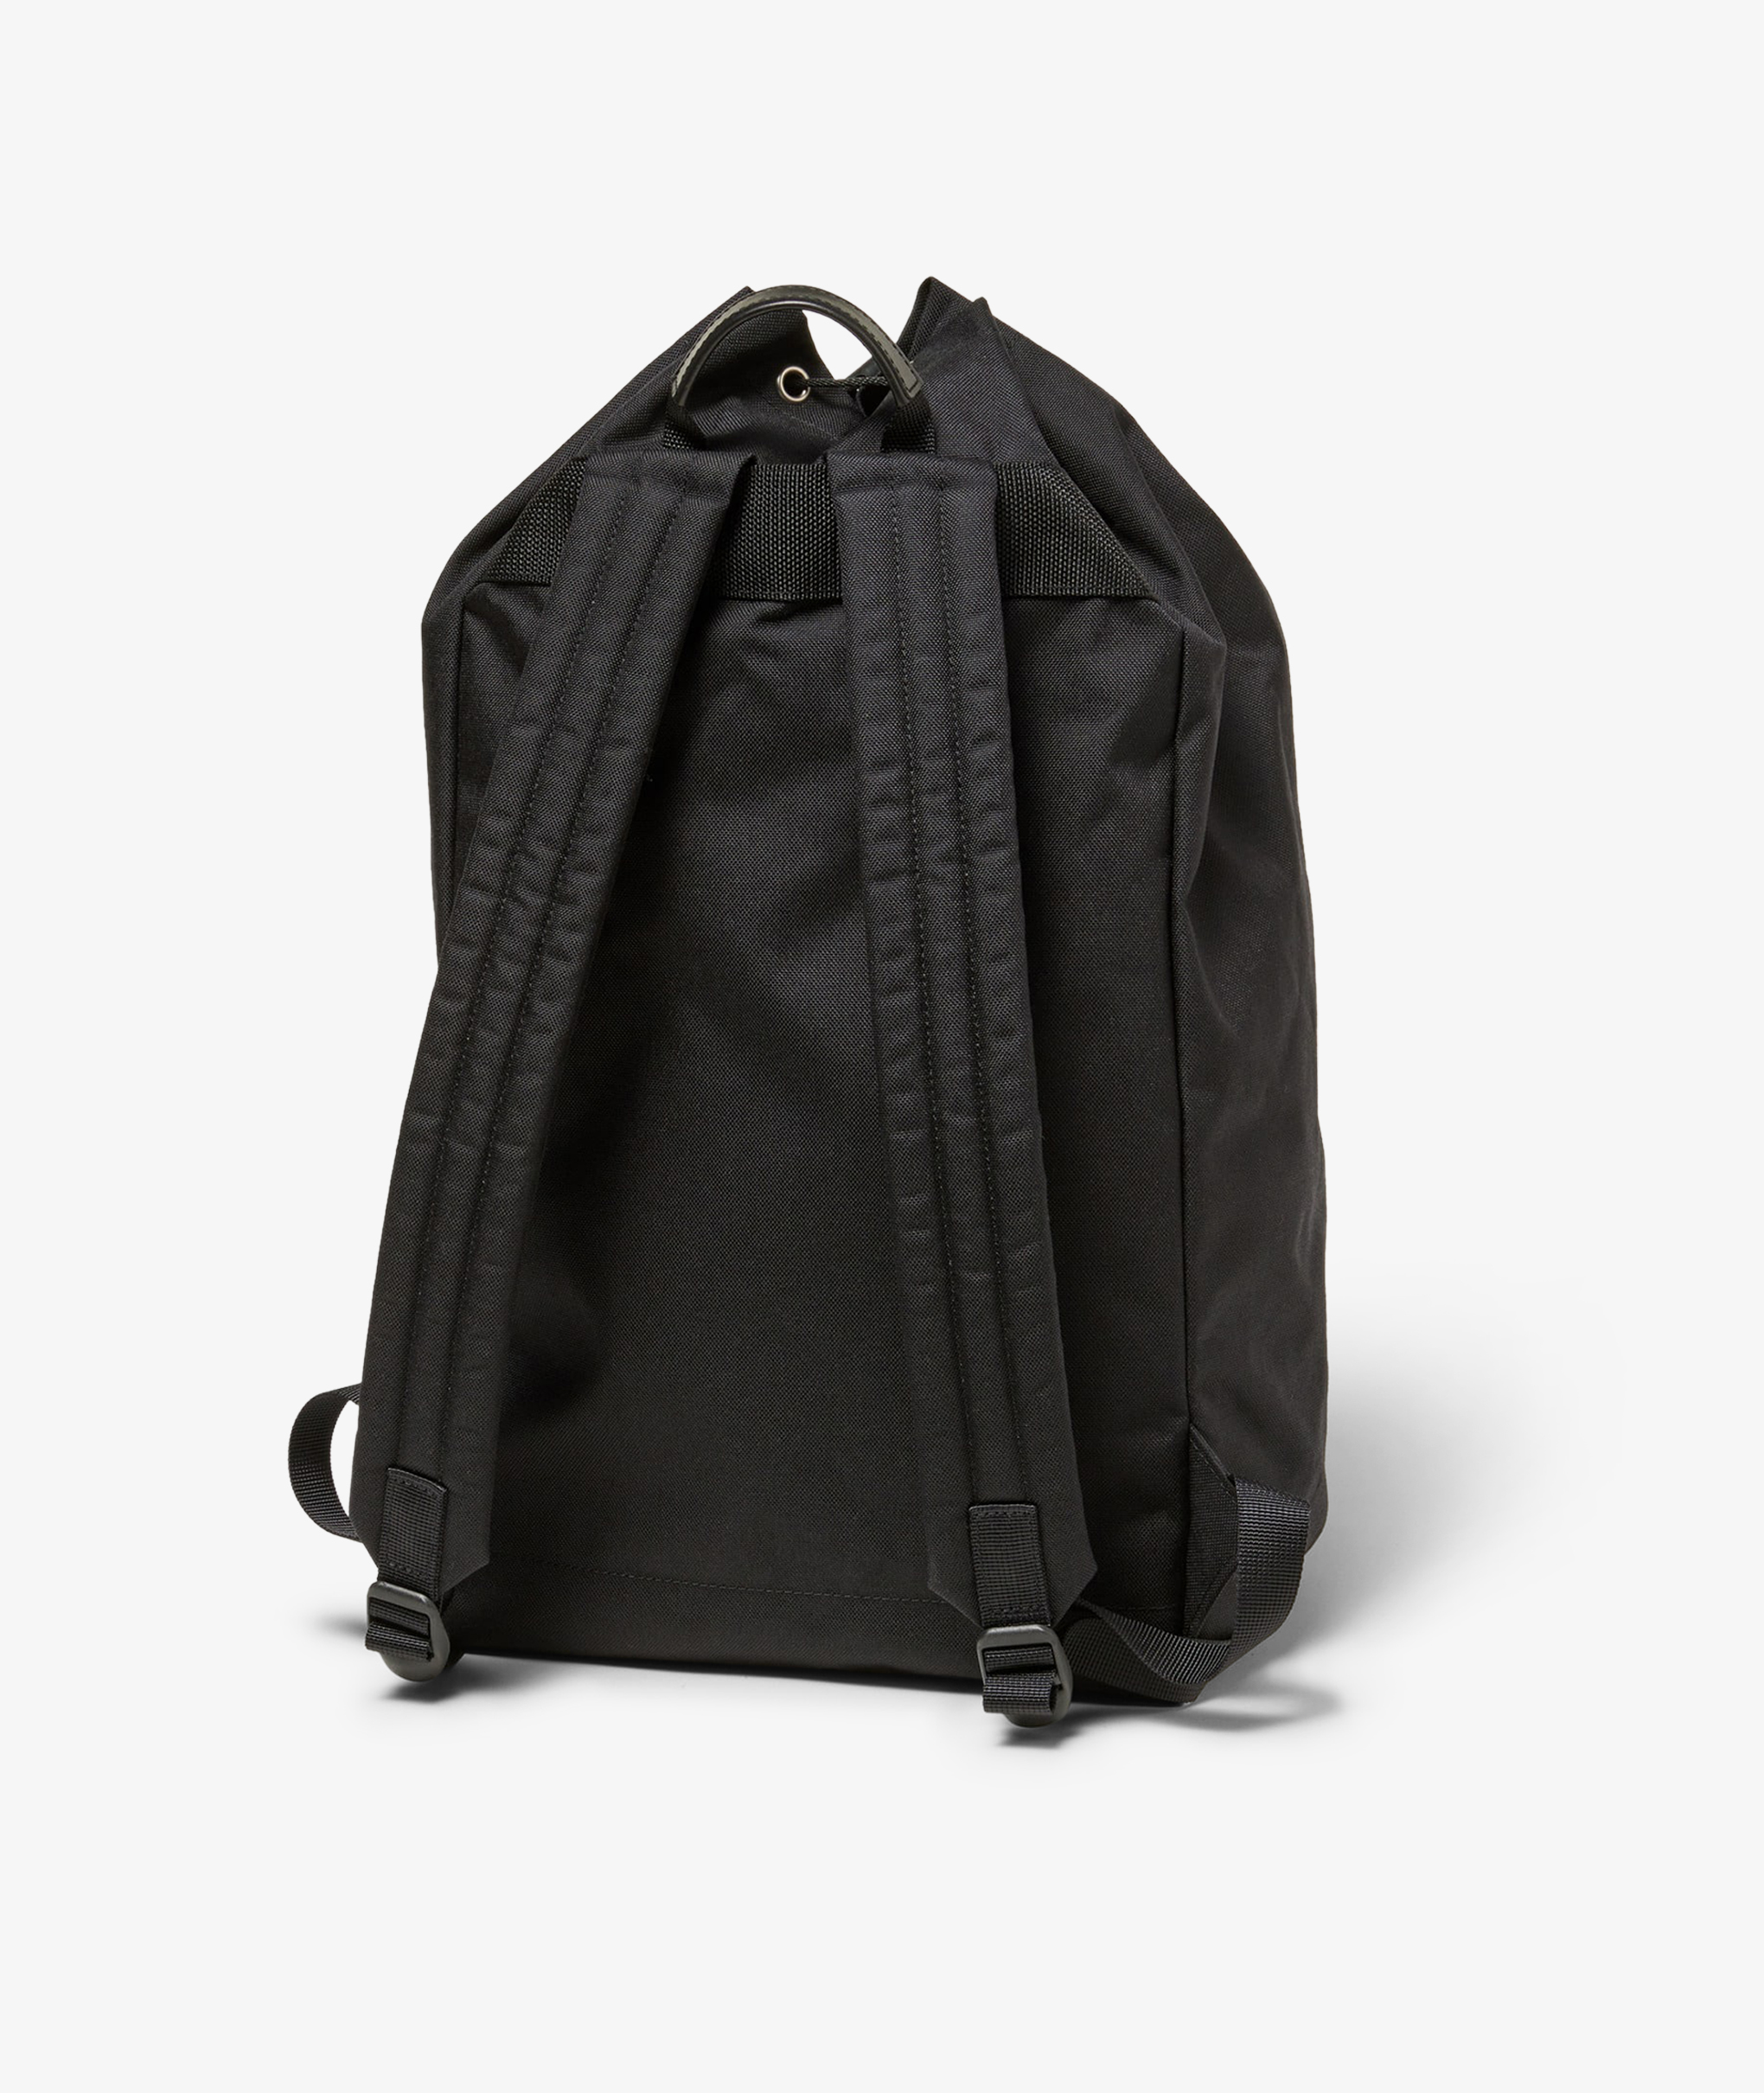 Norse Store | Shipping Worldwide - Auralee Large Backpack Set By Aeta